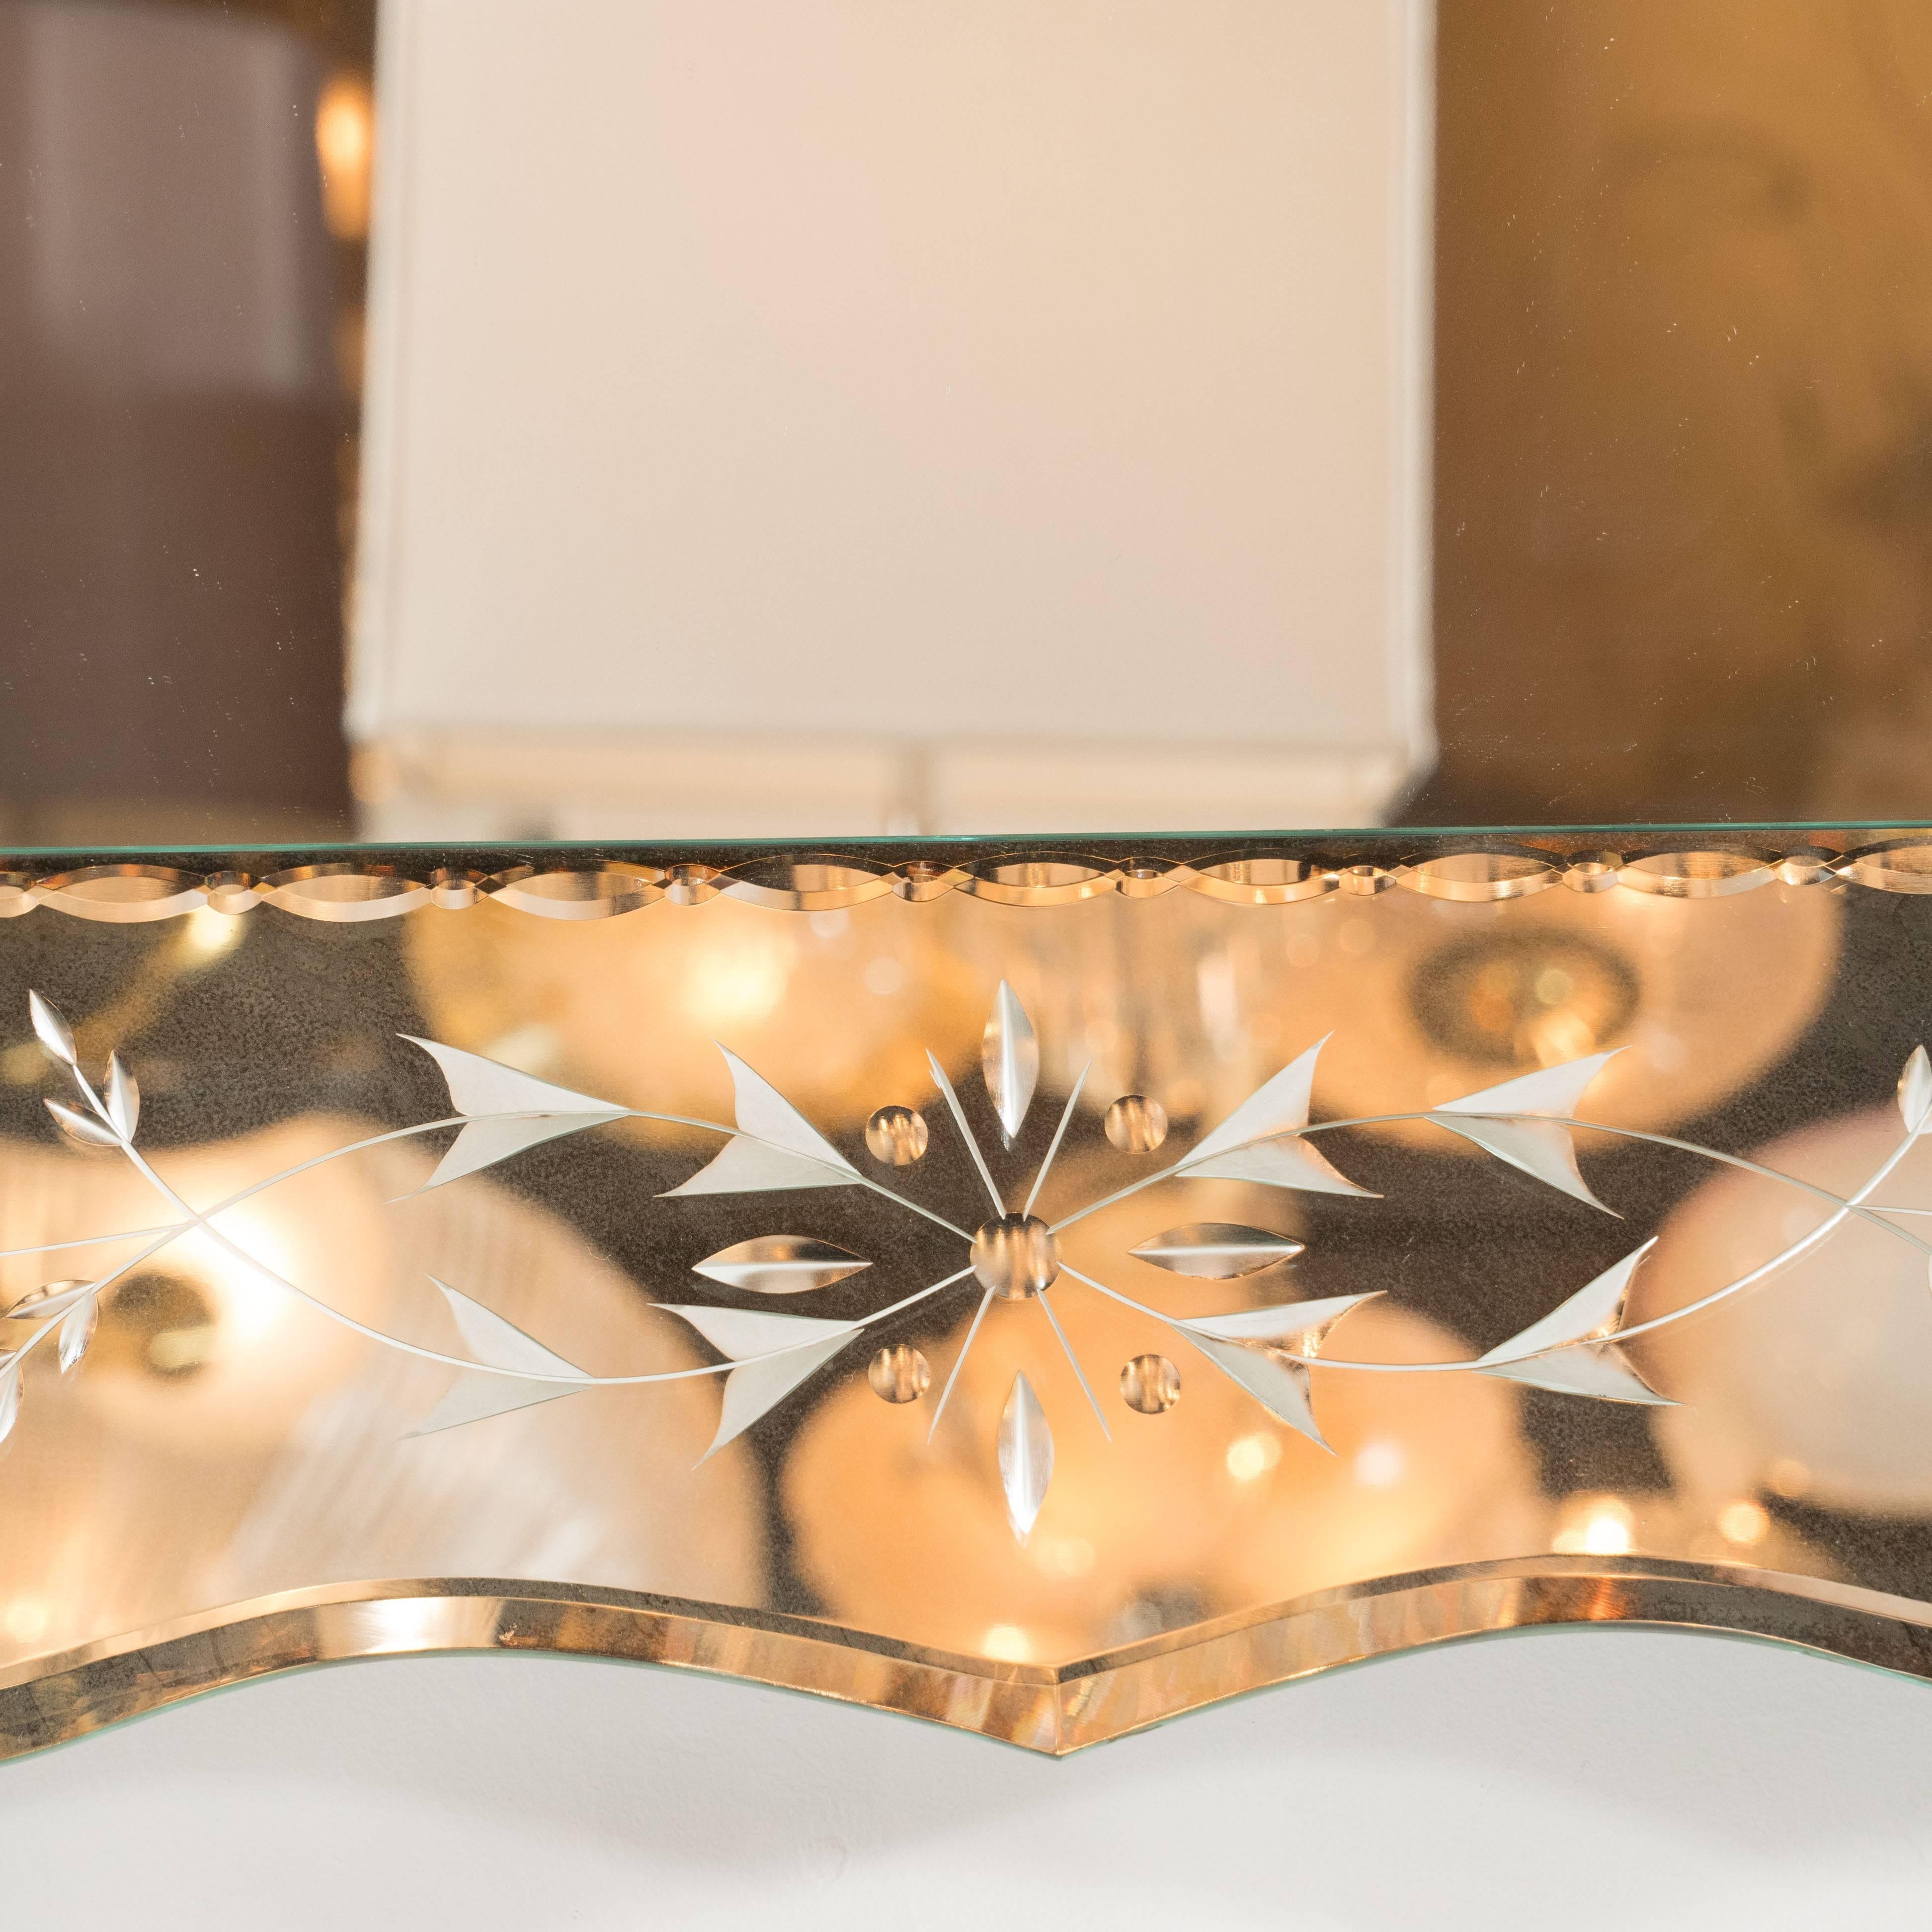 This 1940s Hollywood reverse-etched Venetian-style mirror features beveled scalloped edges on the outer edge with chain beveling inner edge. Geometric and stylized-floral design breathes levity into this substantial vintage mirror. It can be mounted